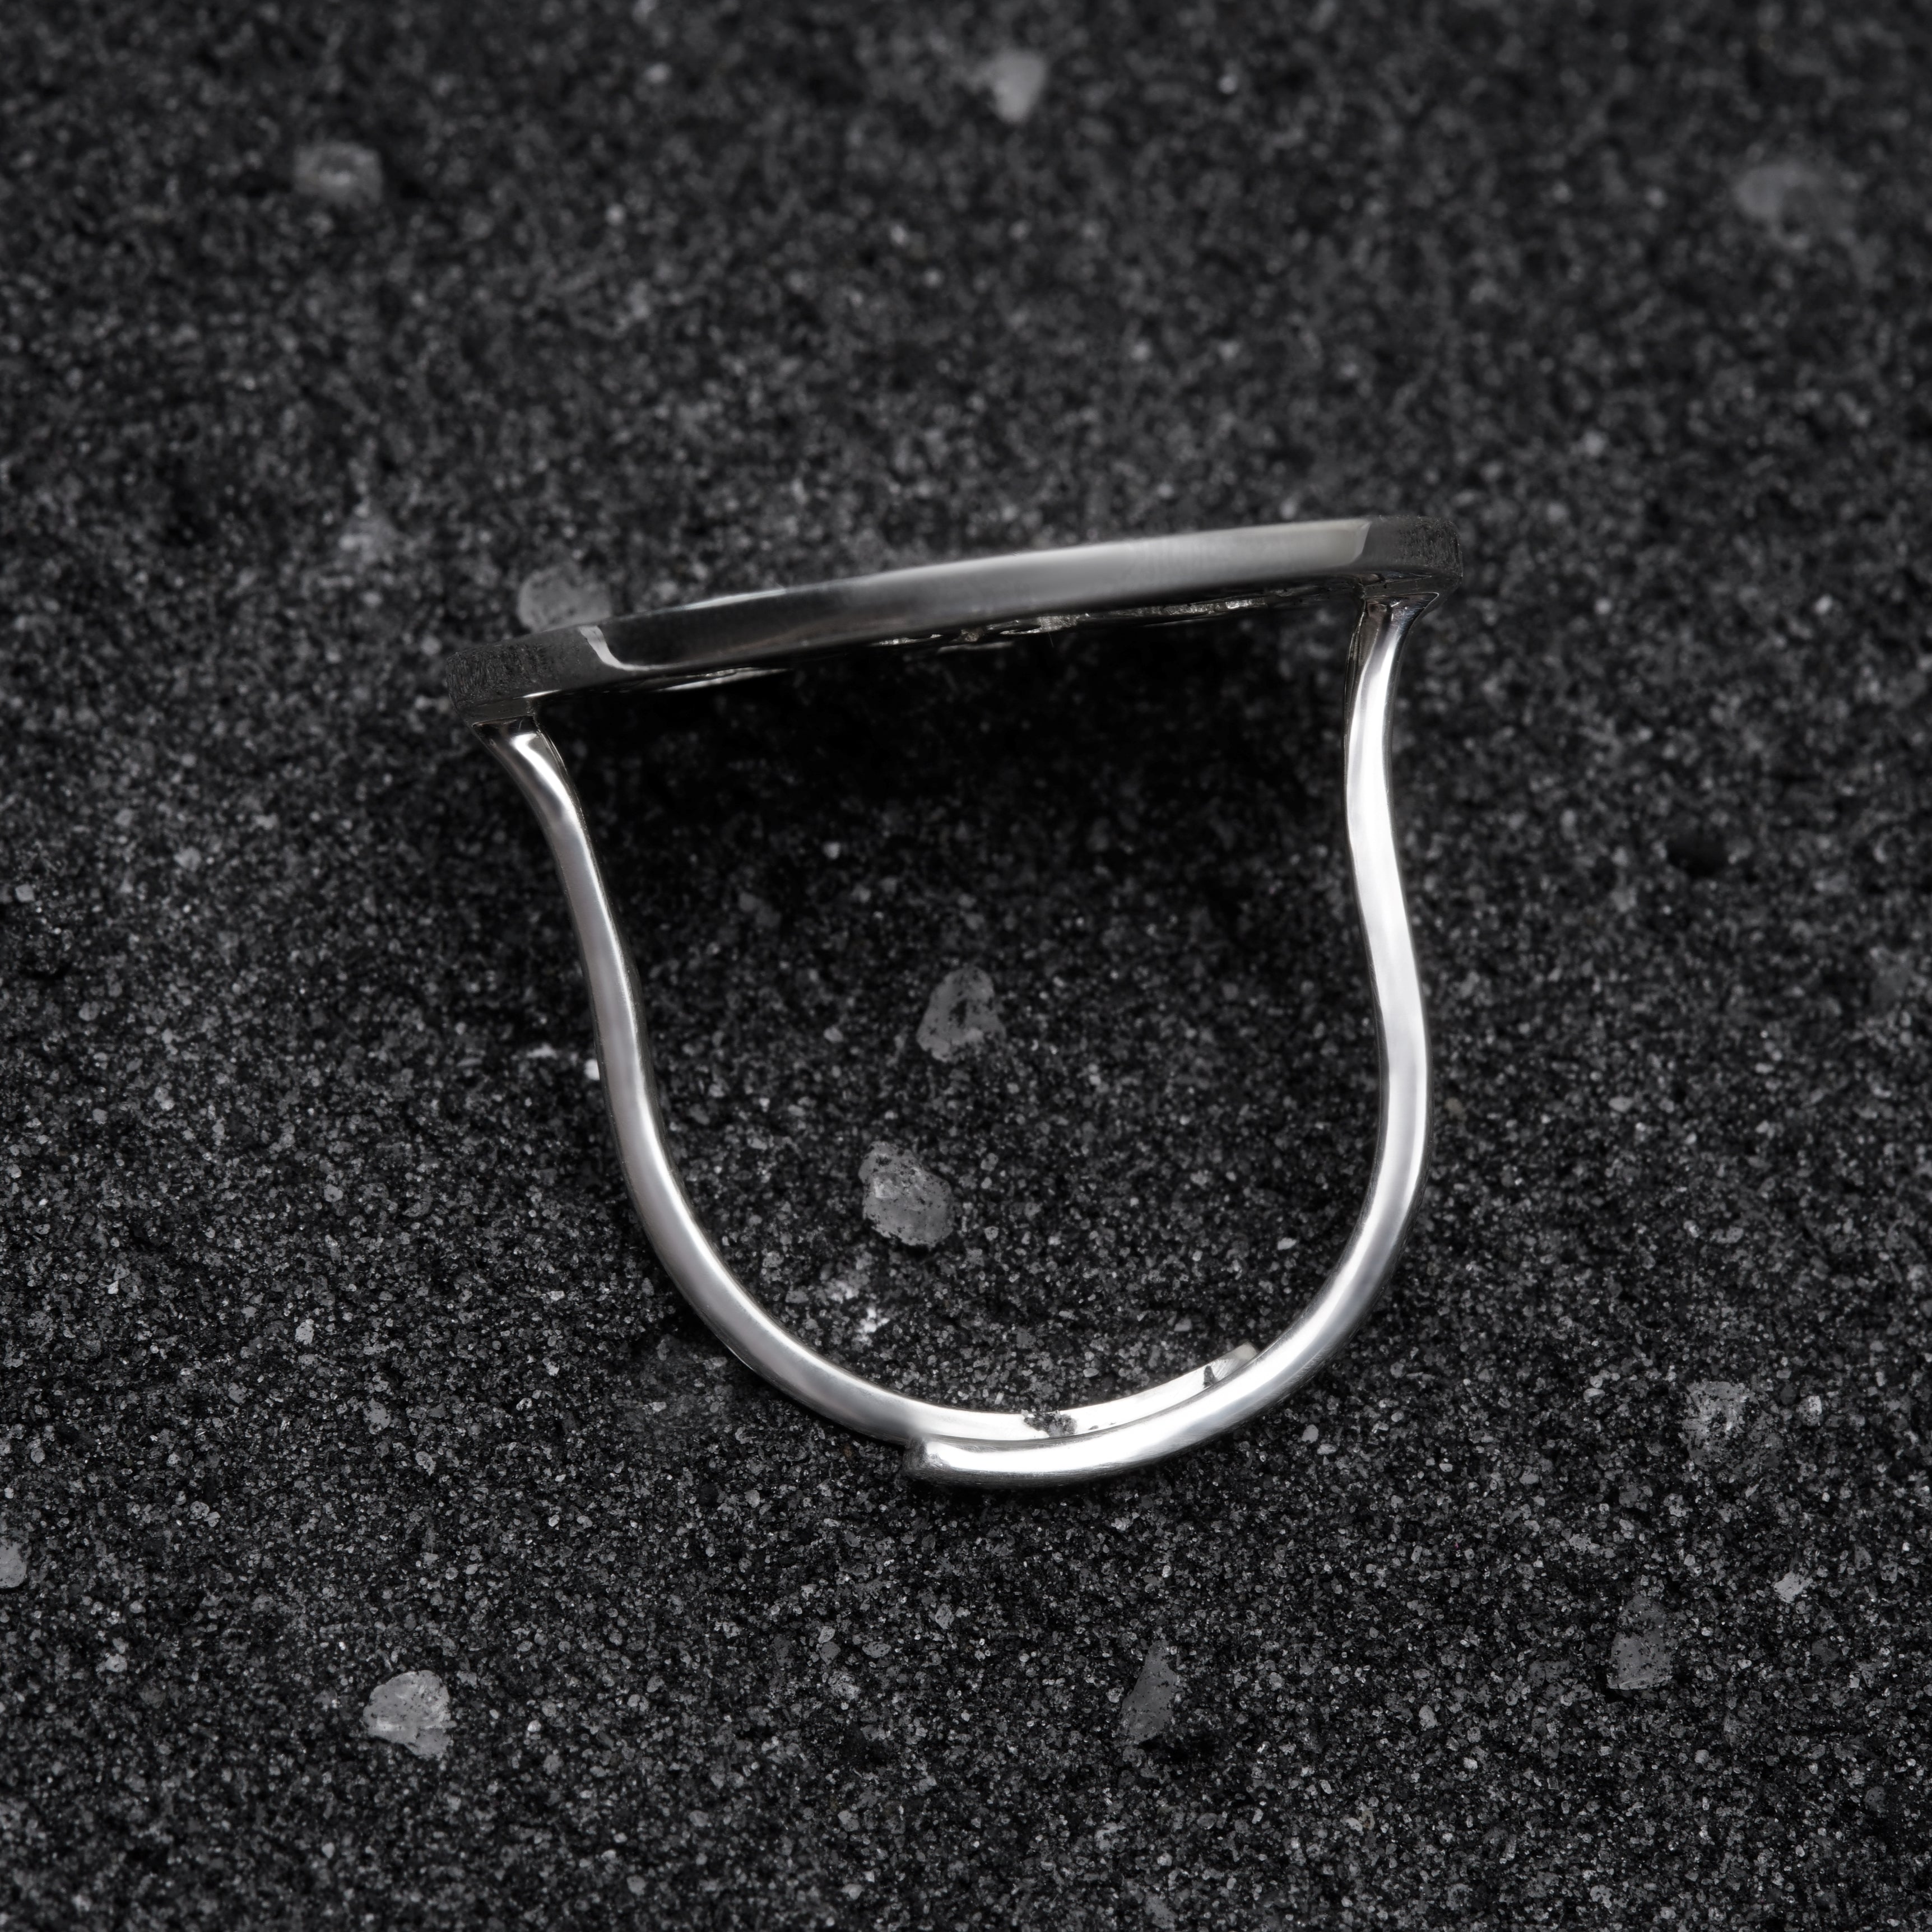 a close up of a metal object on a black surface